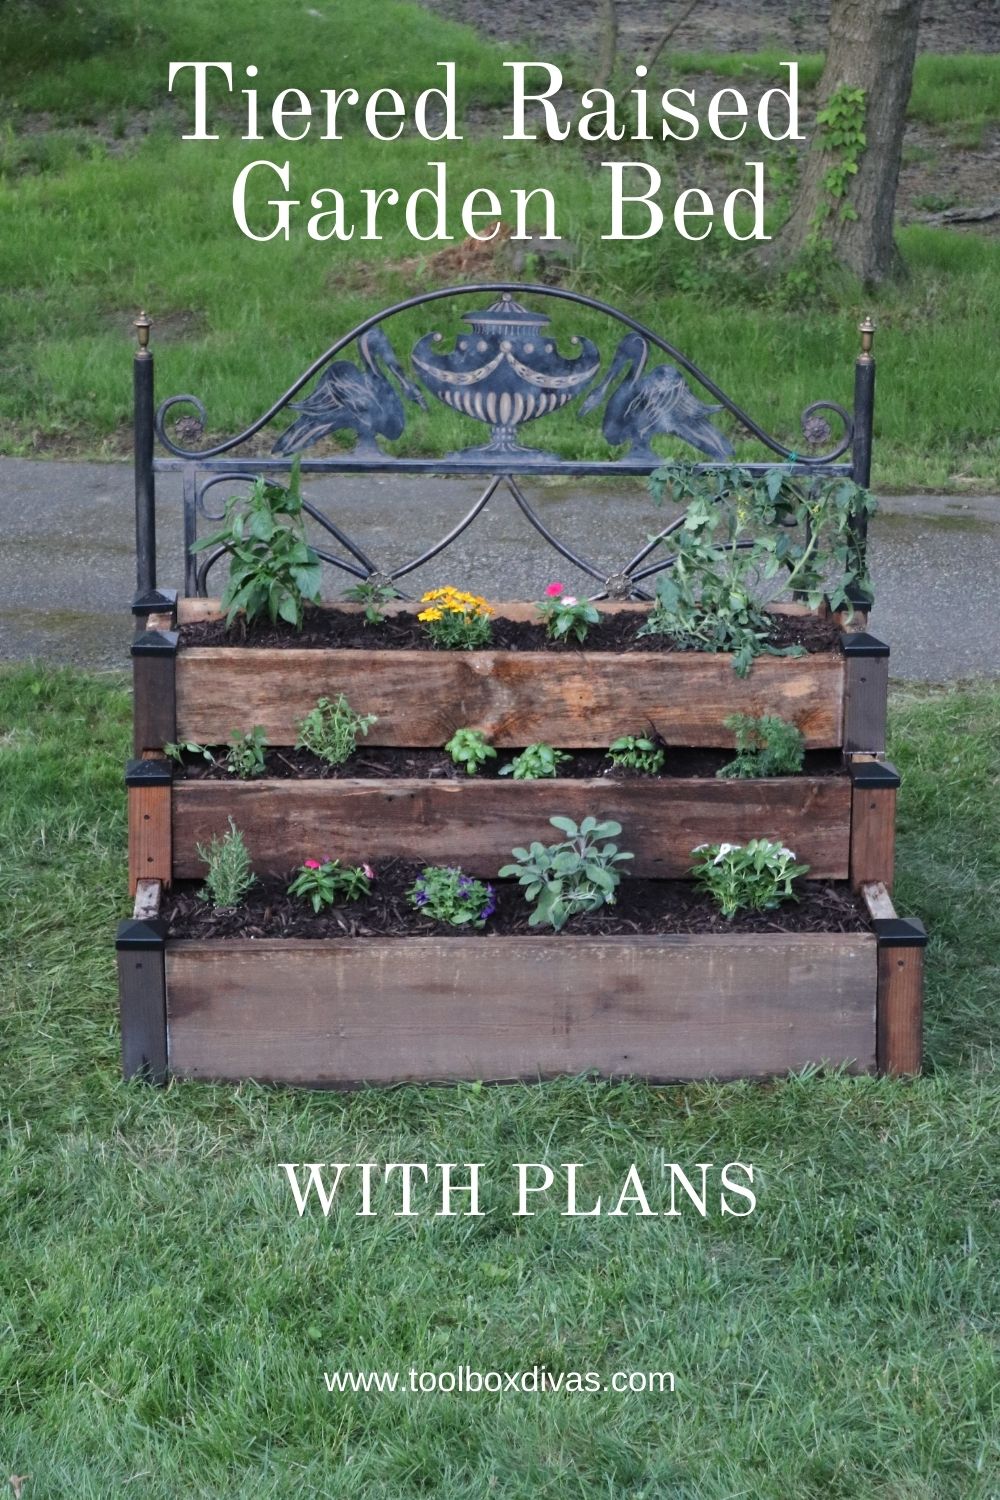 tiered garden bed with text overlay "tiered raised garden bed with plans